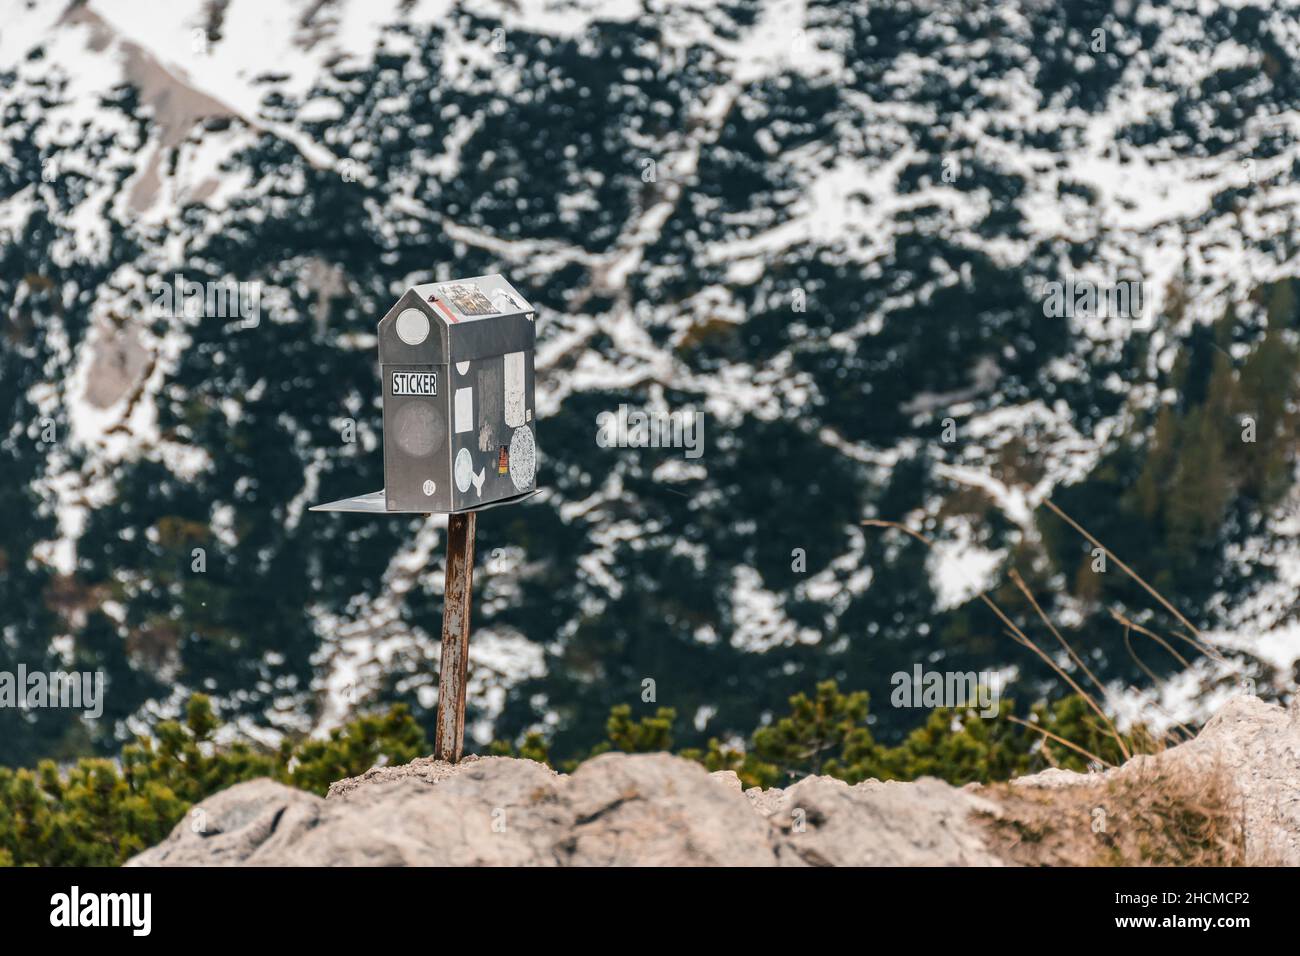 Closeup of a metal box with hiking passbook stamps on a rock against mountains covered with snow Stock Photo